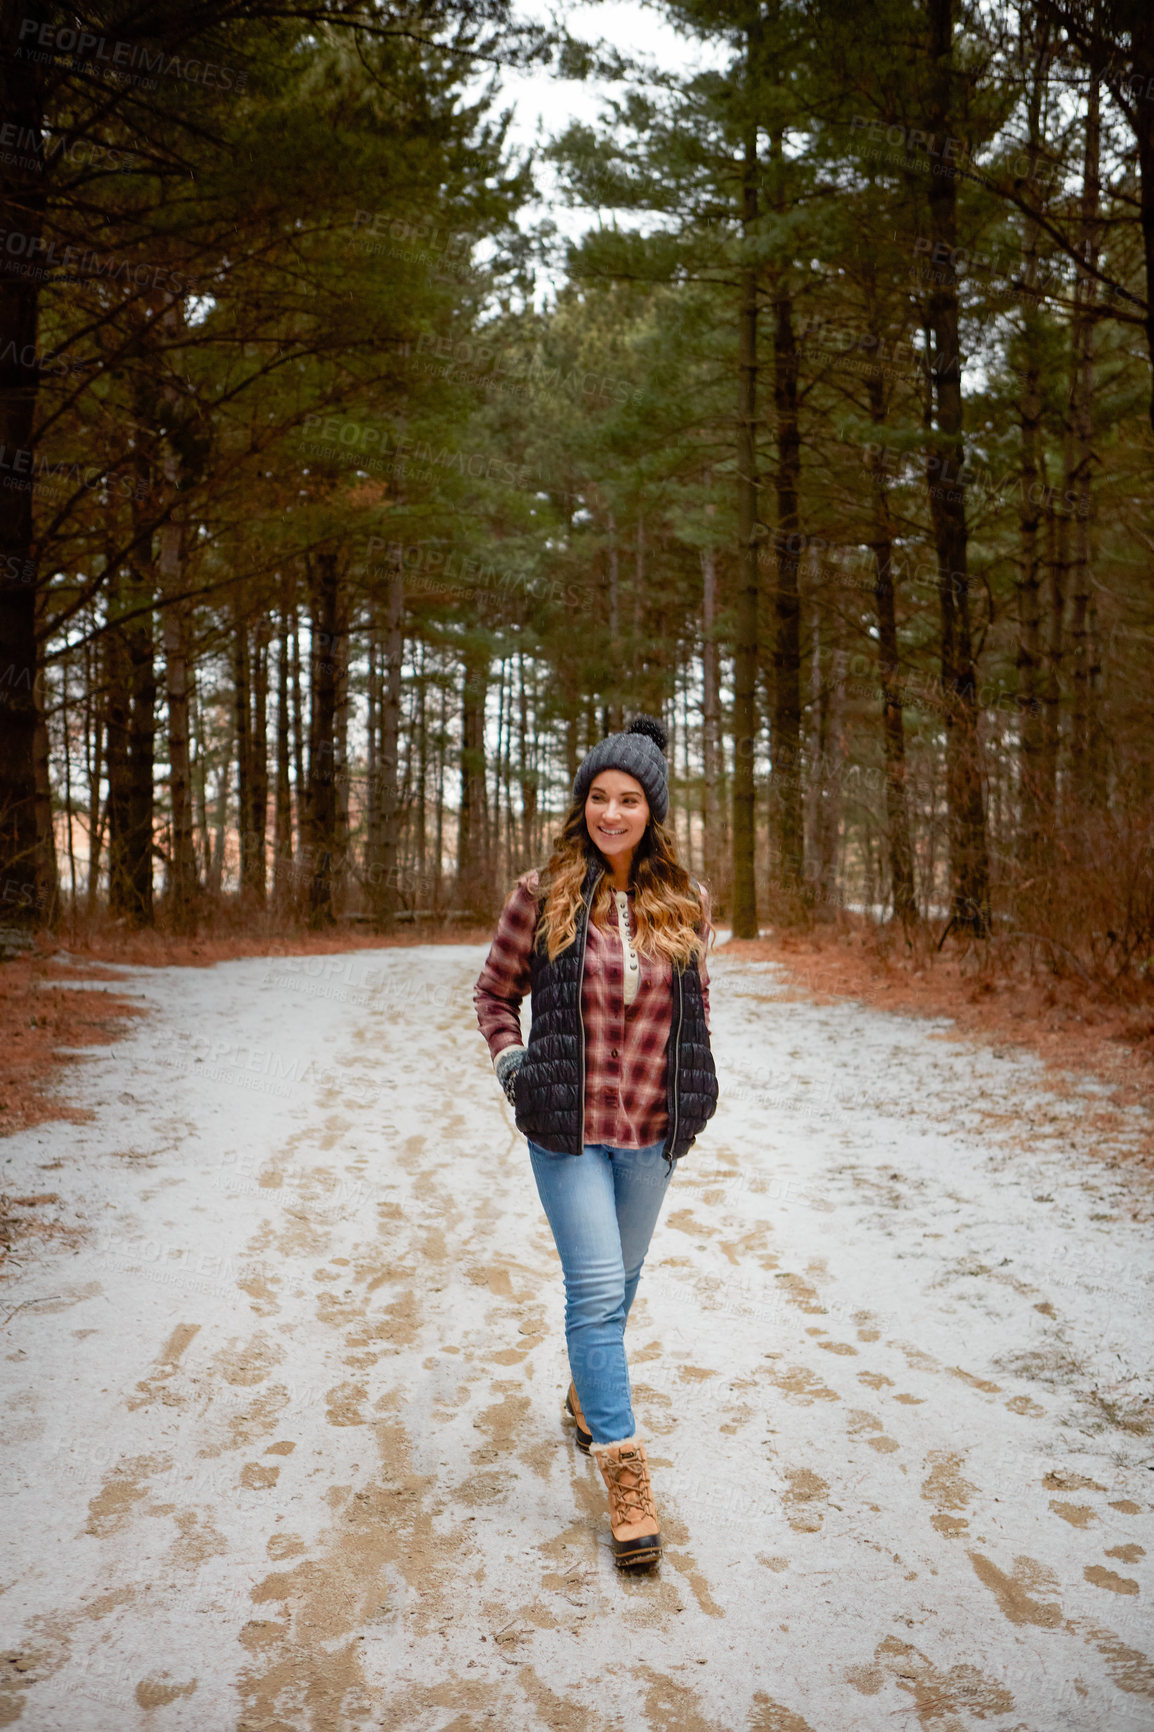 Buy stock photo Shot of a young woman hiking in the wilderness during winter